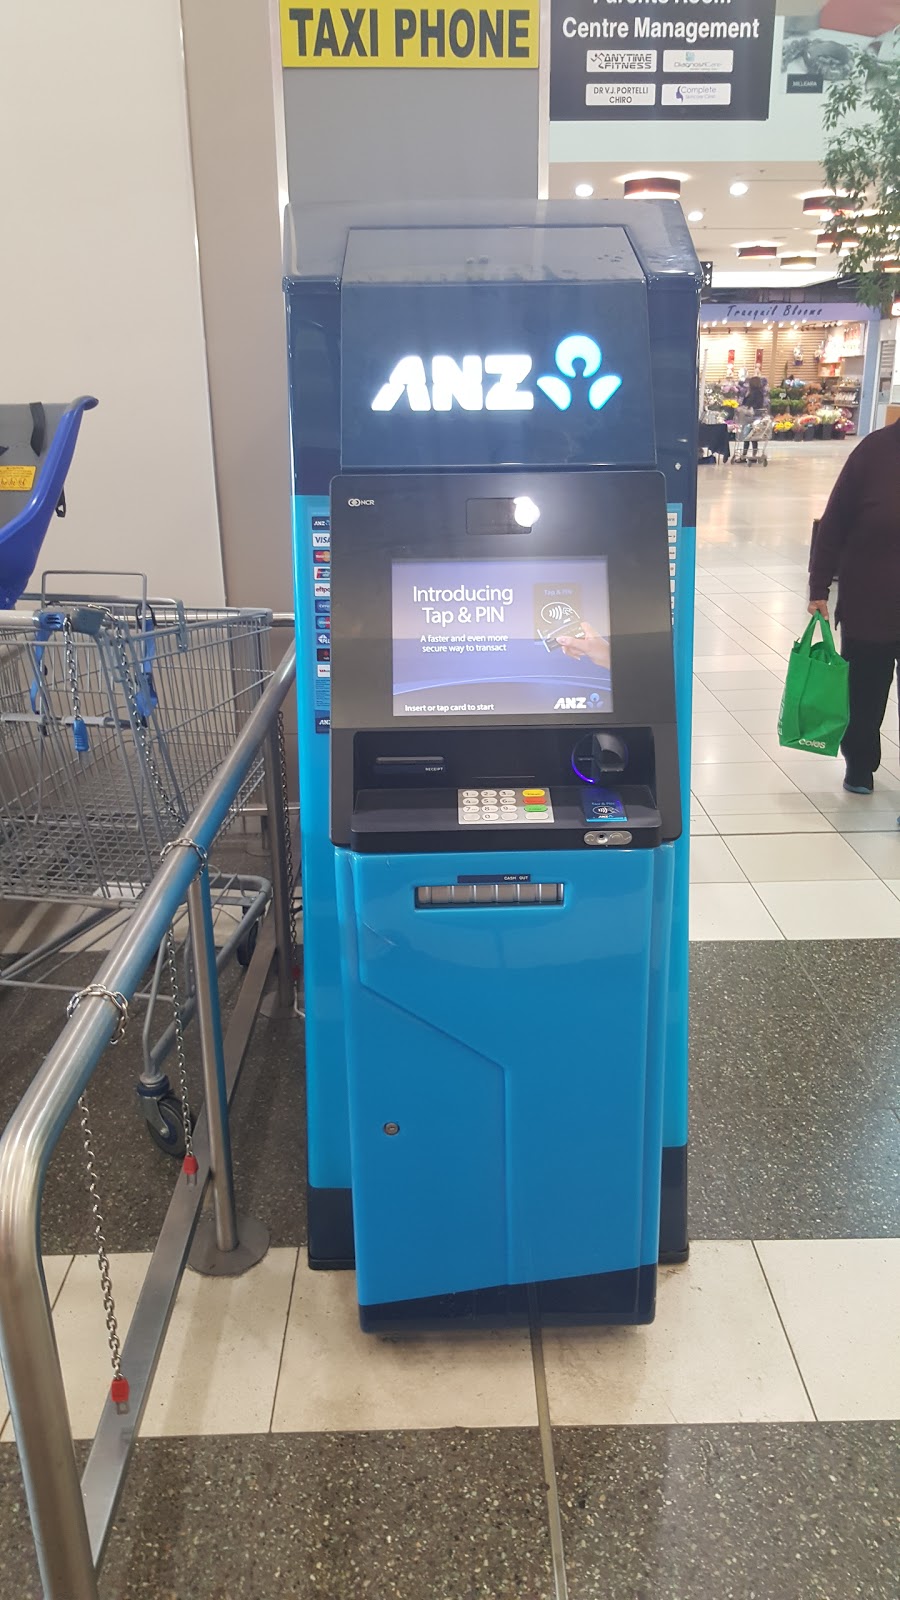 ANZ ATM Milleara Mall | atm | Milleara Rd &, Buckley St, Keilor East VIC 3033, Australia | 131314 OR +61 131314